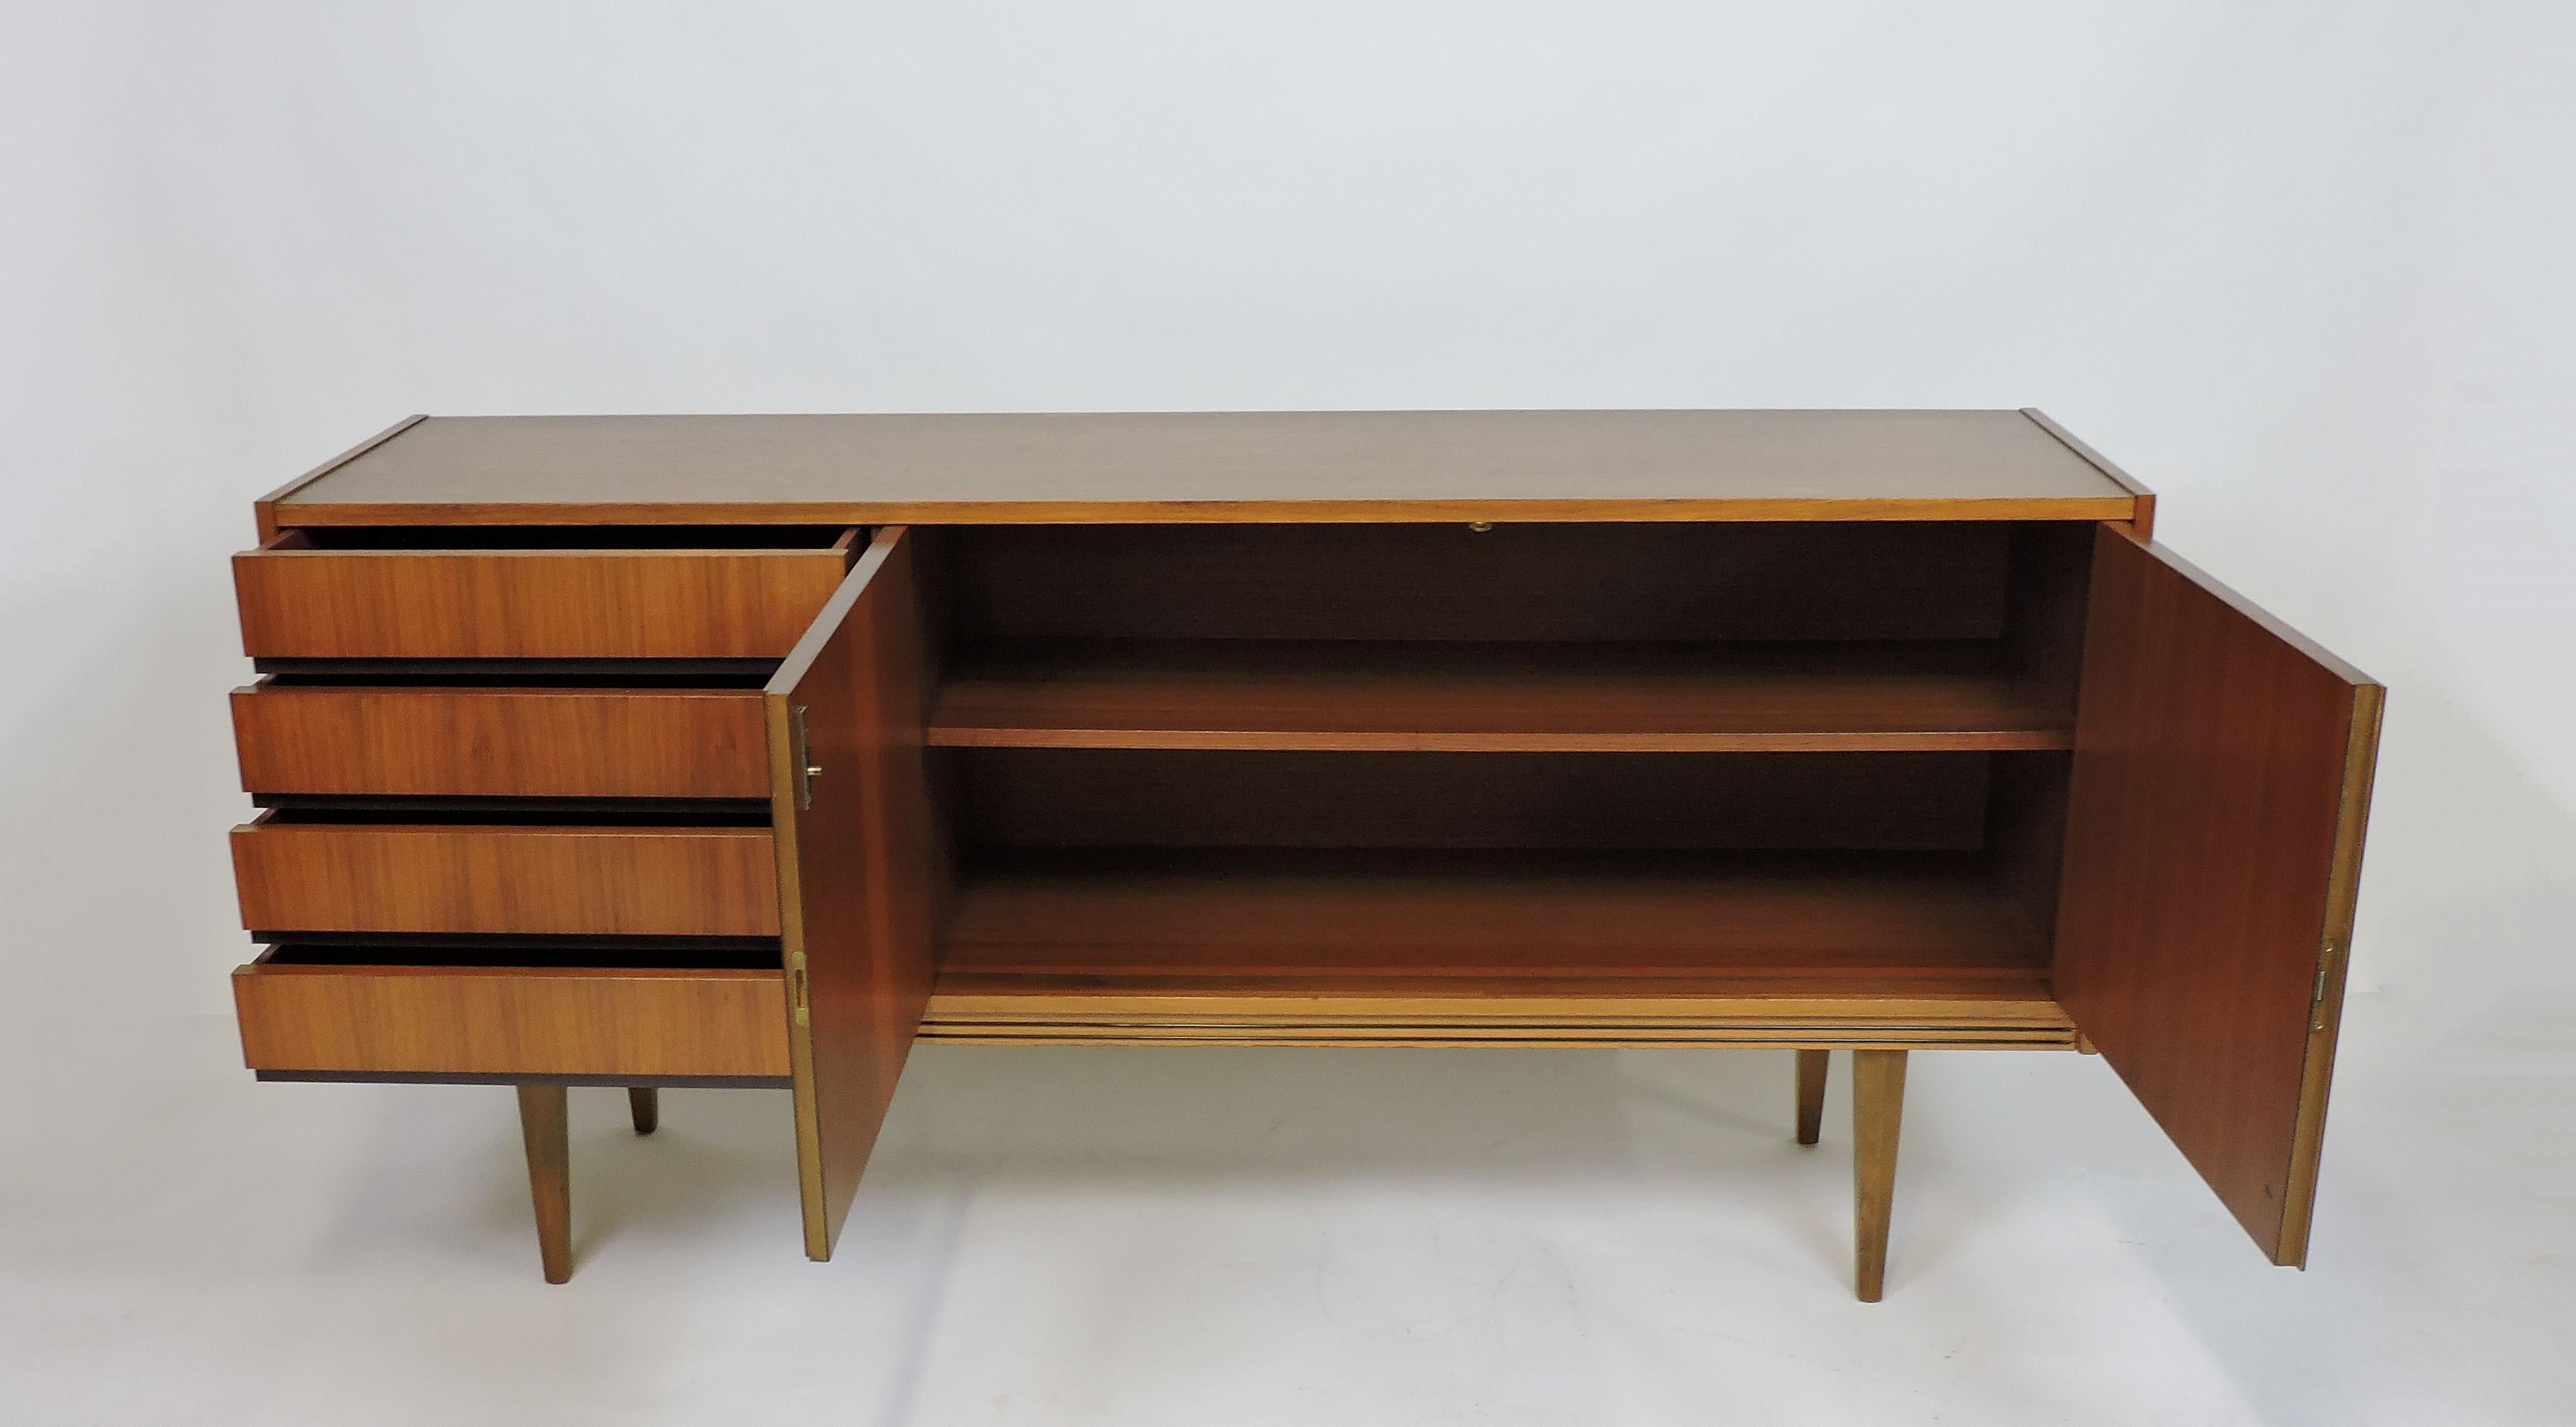 Handsome and well made midcentury teak cabinet made in Germany by Munker Modell. This credenza has four drawers, two doors that lock, an interior shelf, and tapered legs. The top drawer has a felt lining and there is a label on the back. A key is